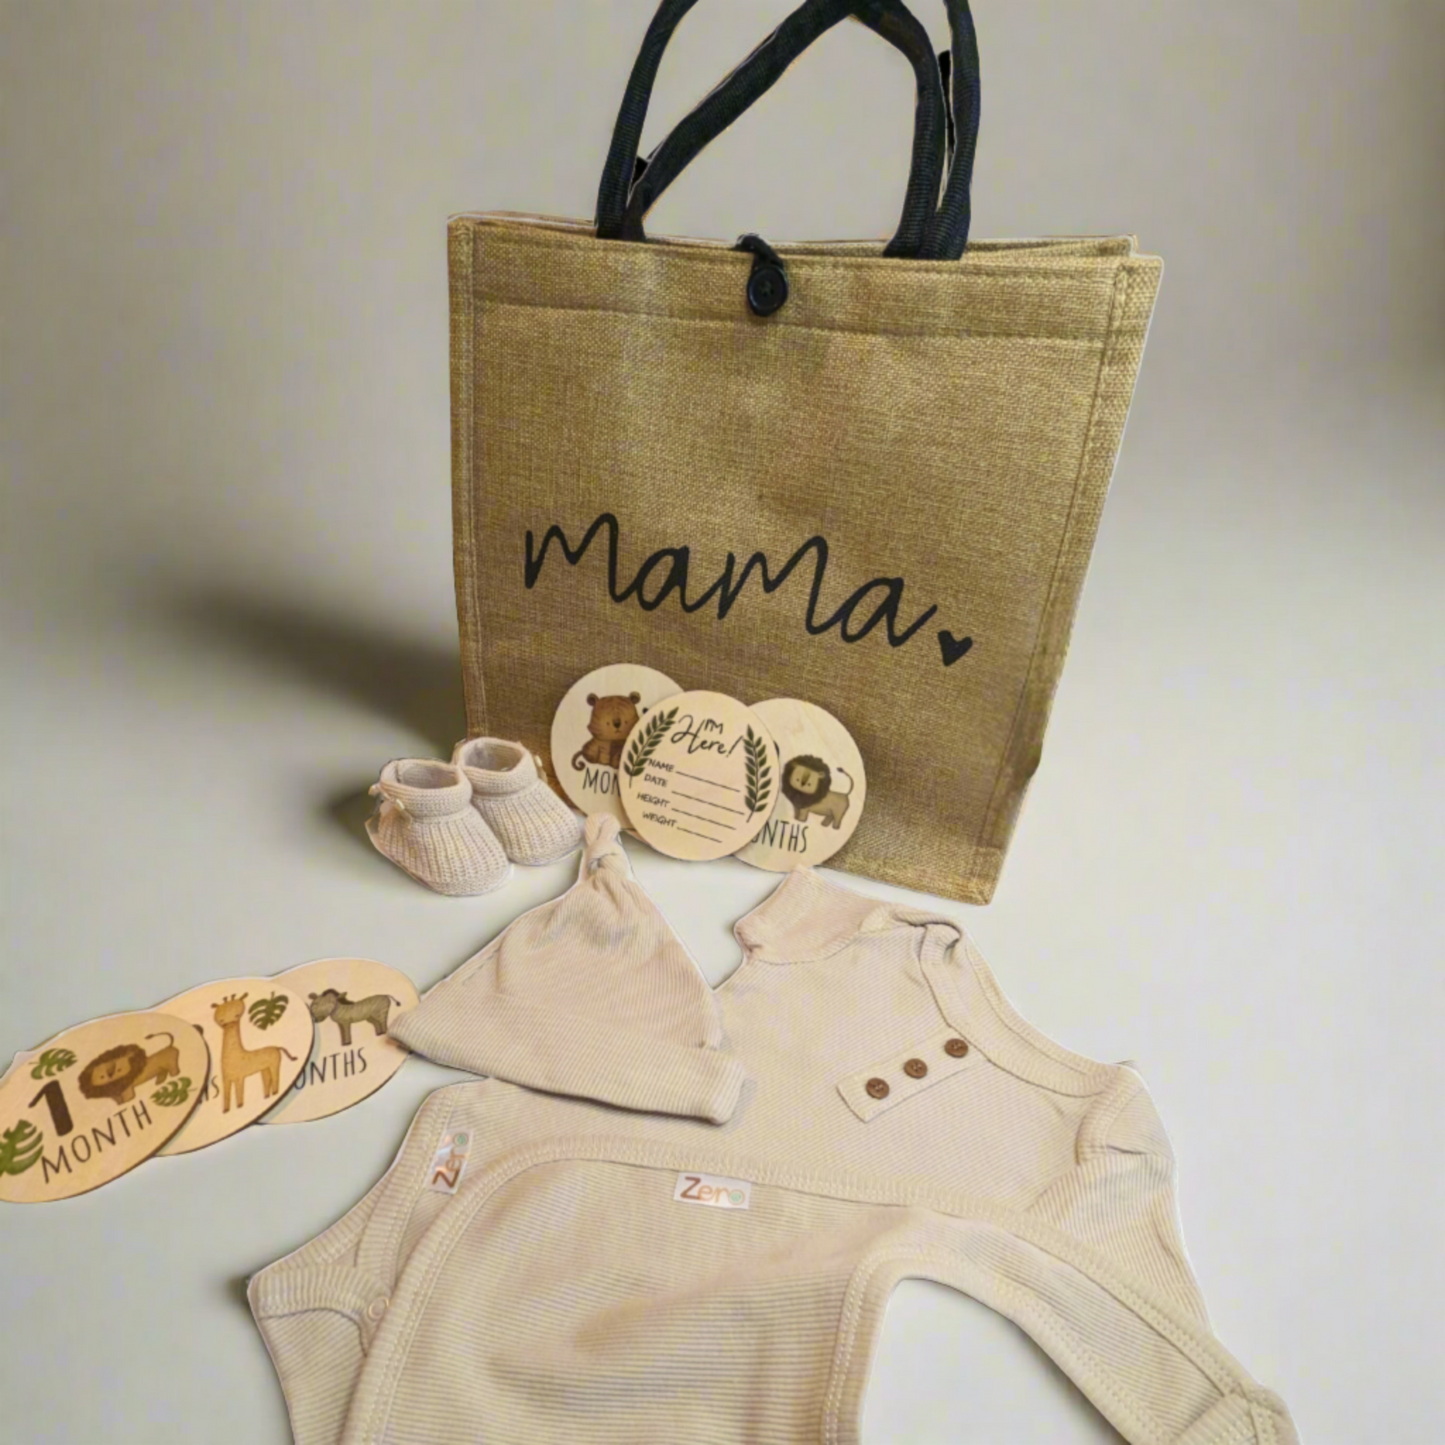 Hessian bag, wooden milestone discs, eco-friendly baby clothes, and knit booties making the perfect mummy to be gift hamper